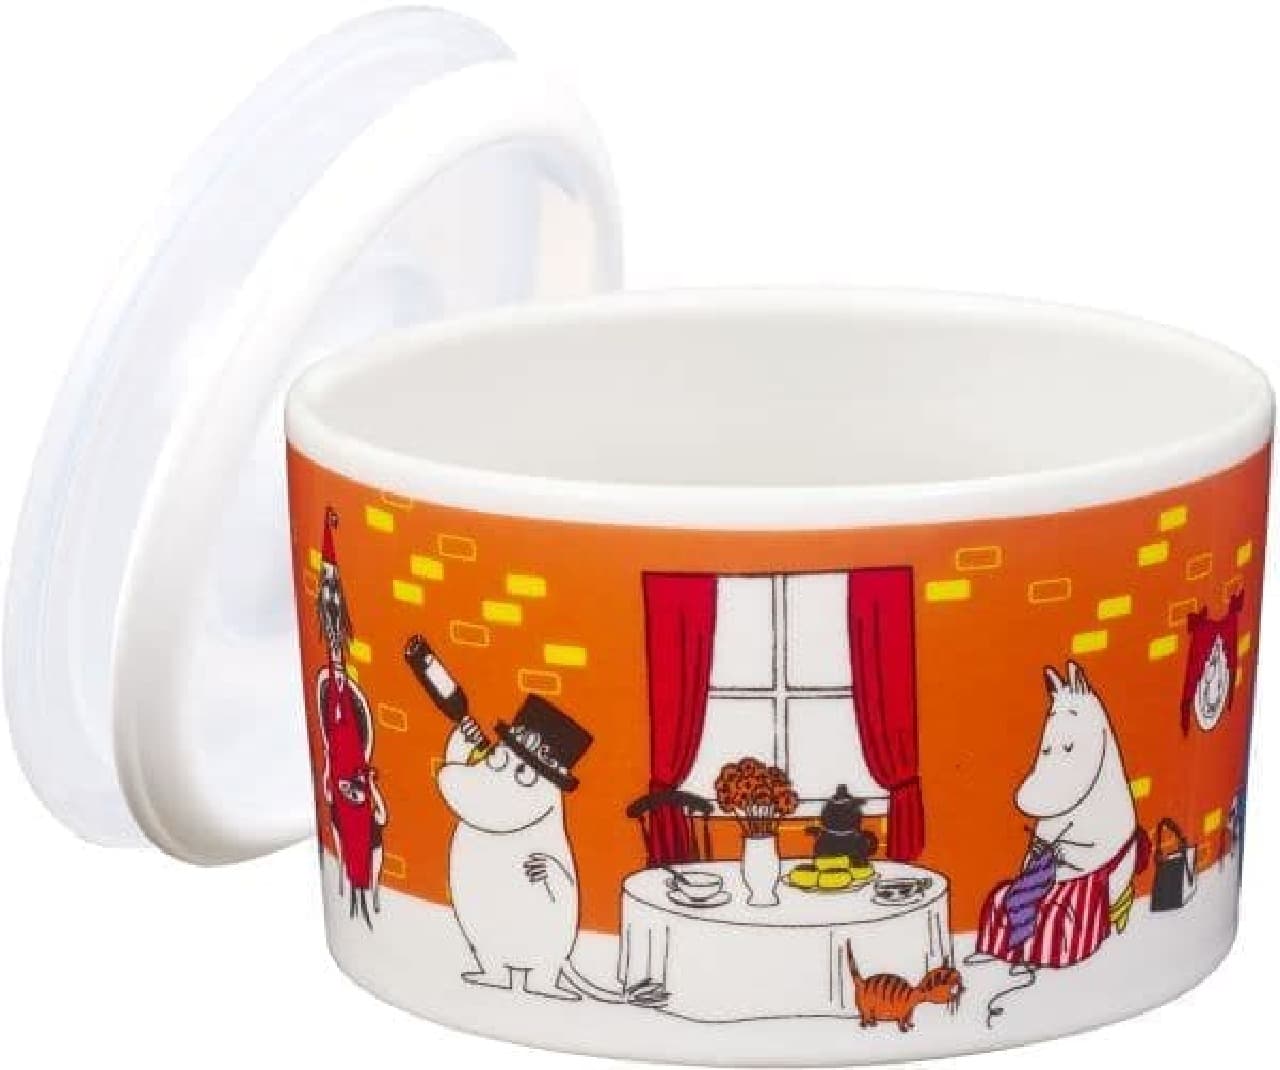 Kentucky Fried Chicken "Moomin Small Bowl with Lid"